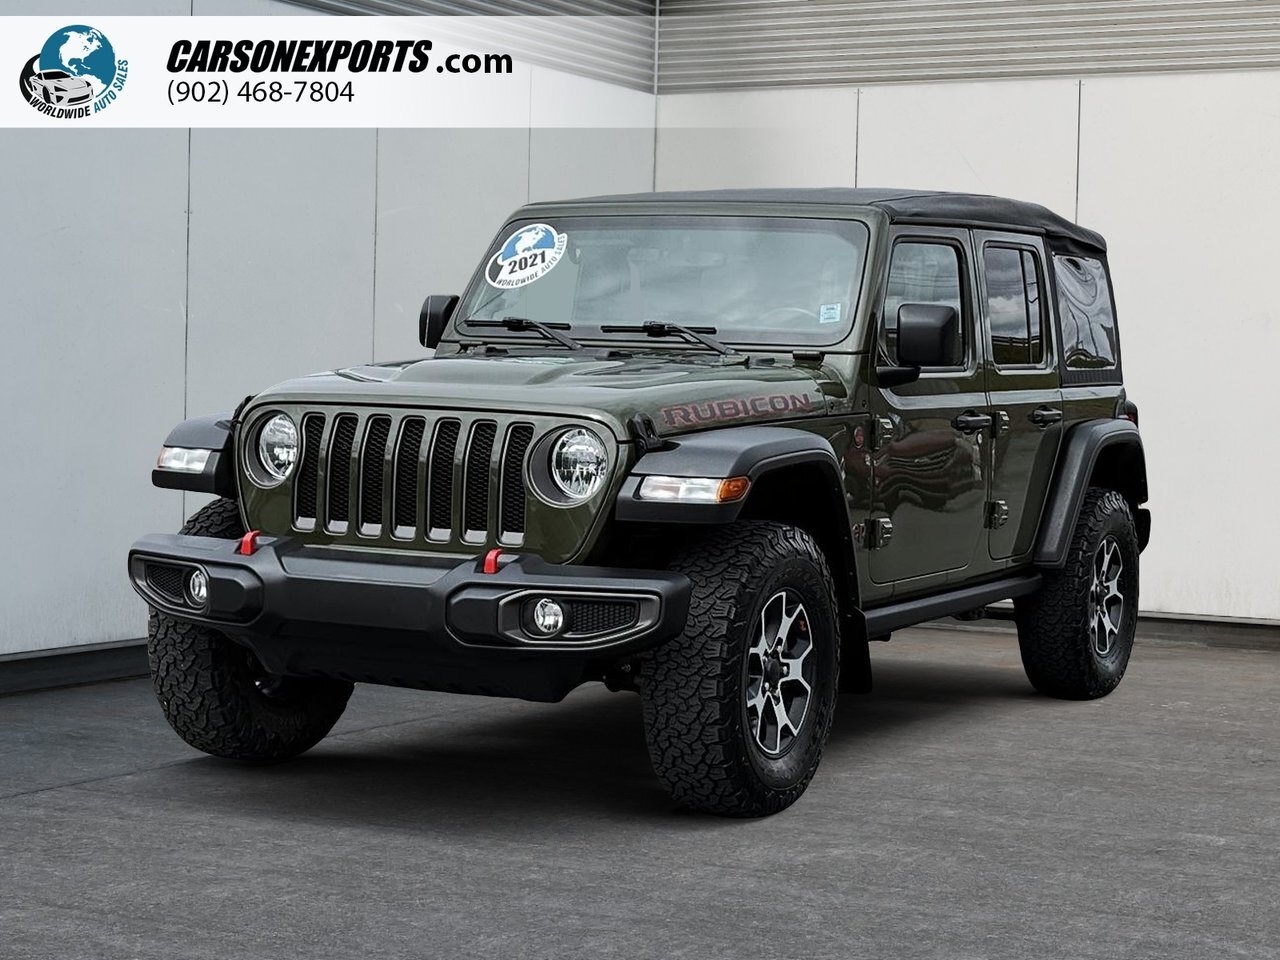 2021 Jeep Wrangler Unlimited Rubicon The best place to buy a used car